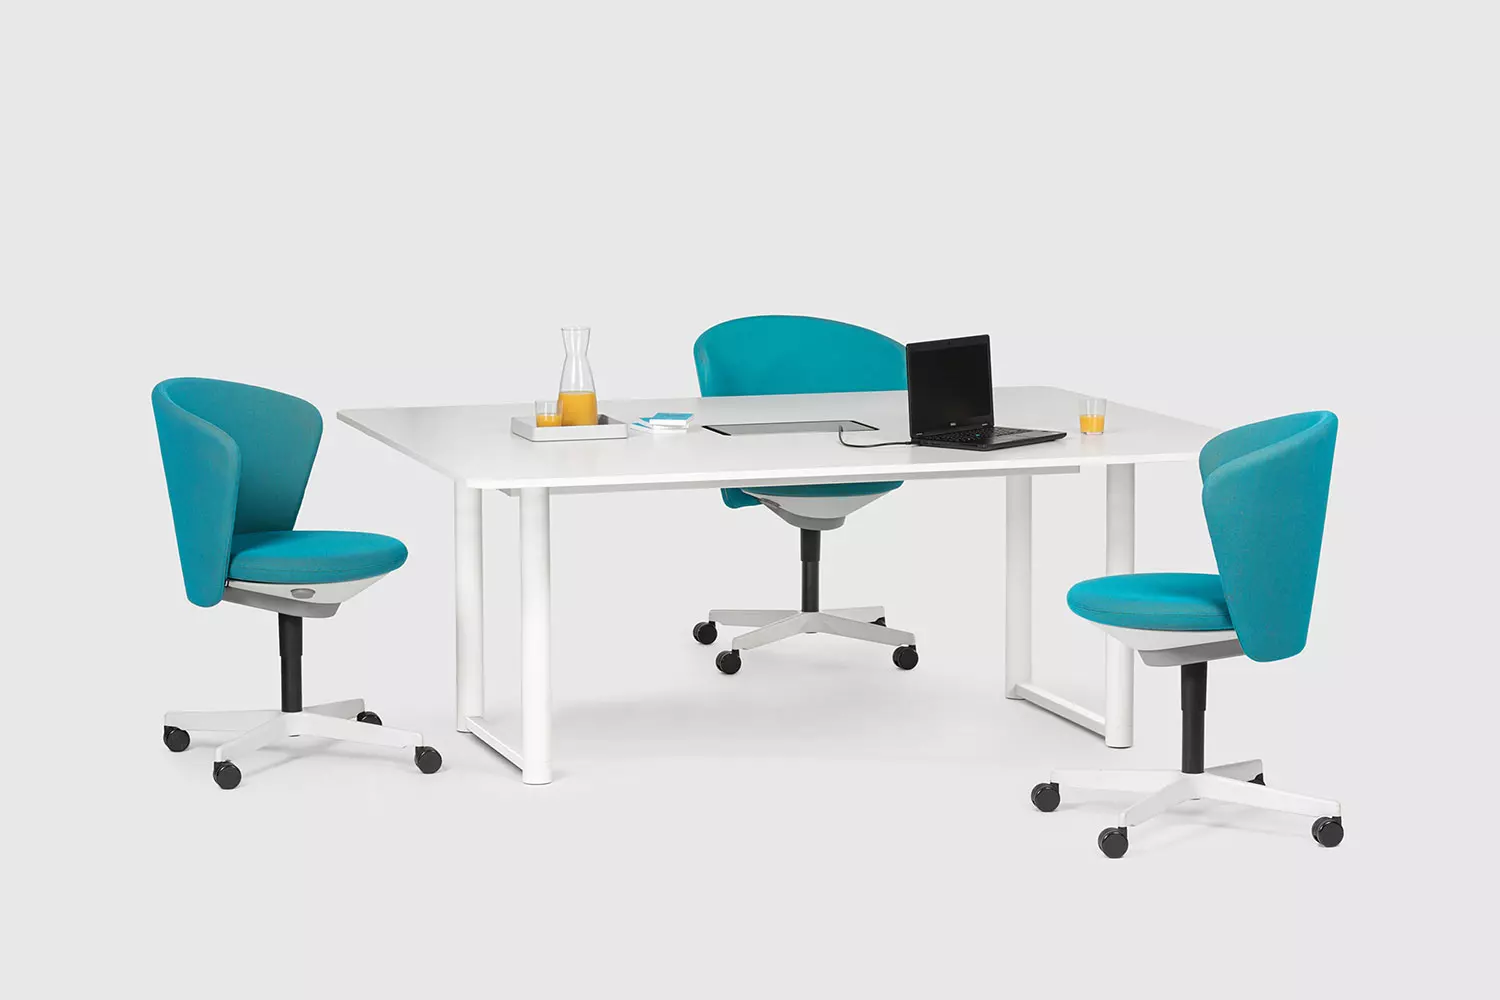 level-pure-meeting-quattro, Seating height Meeting table, Bene Office furniture, Image 2